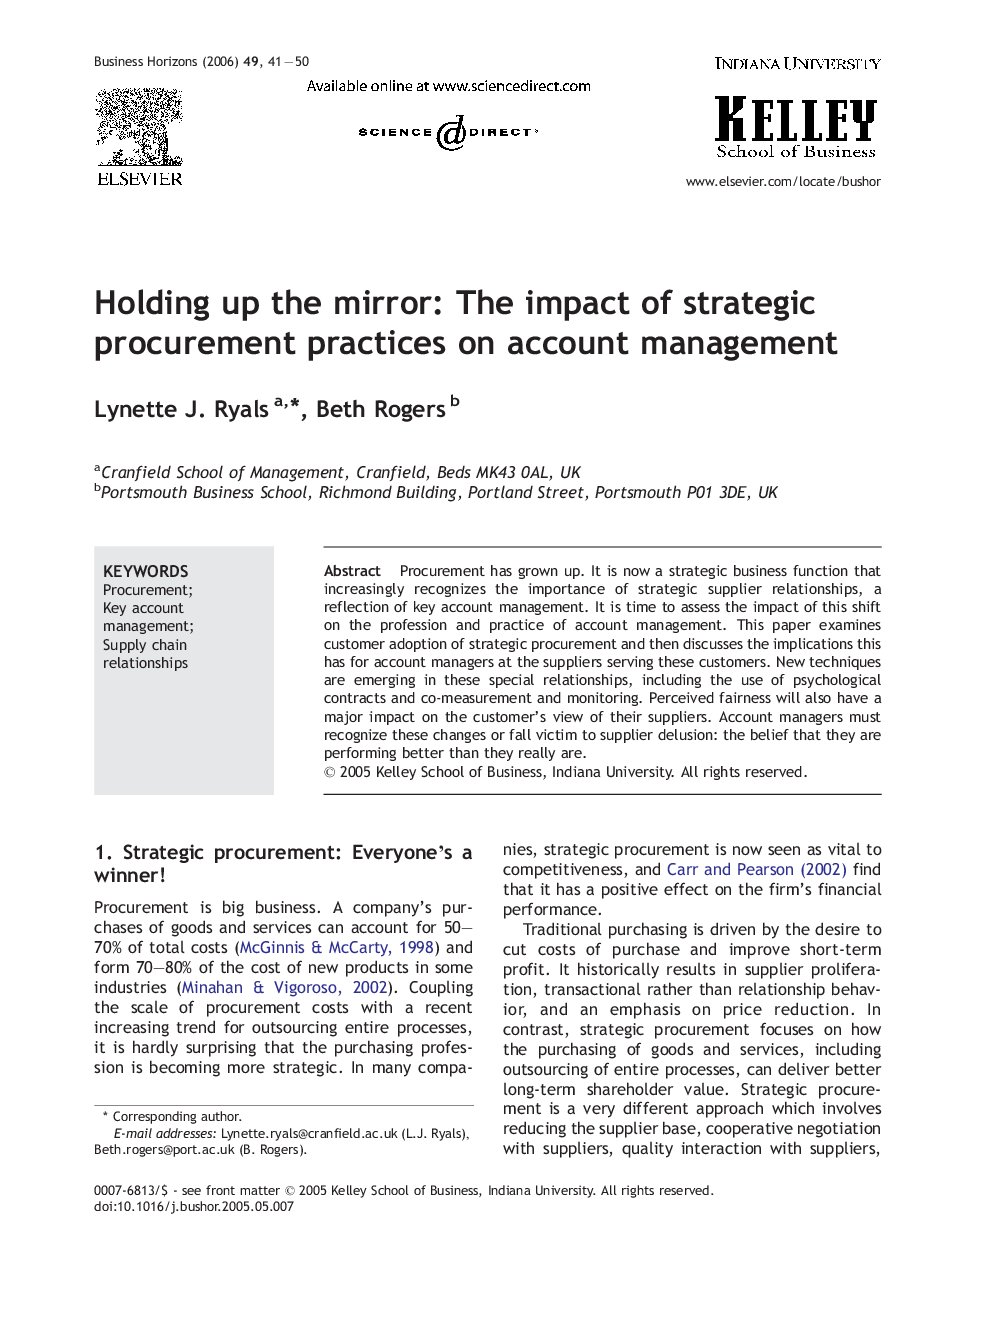 Holding up the mirror: The impact of strategic procurement practices on account management